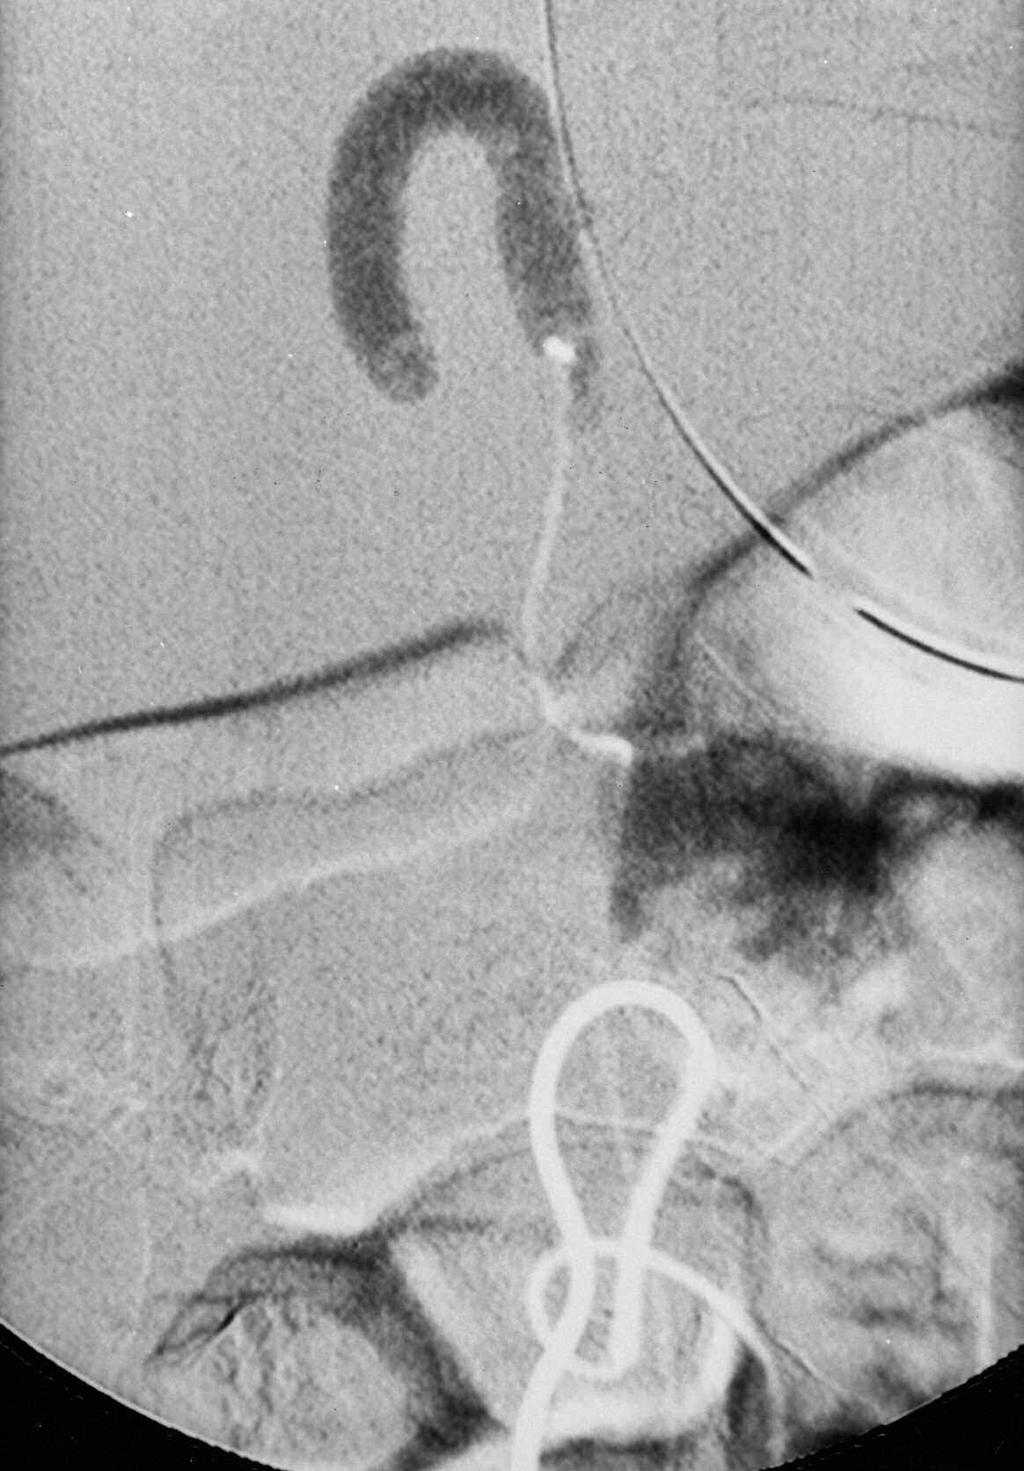 E) Glue embolization closes the shunt between multifeeders and single-hole fistula. and difficult management problems.